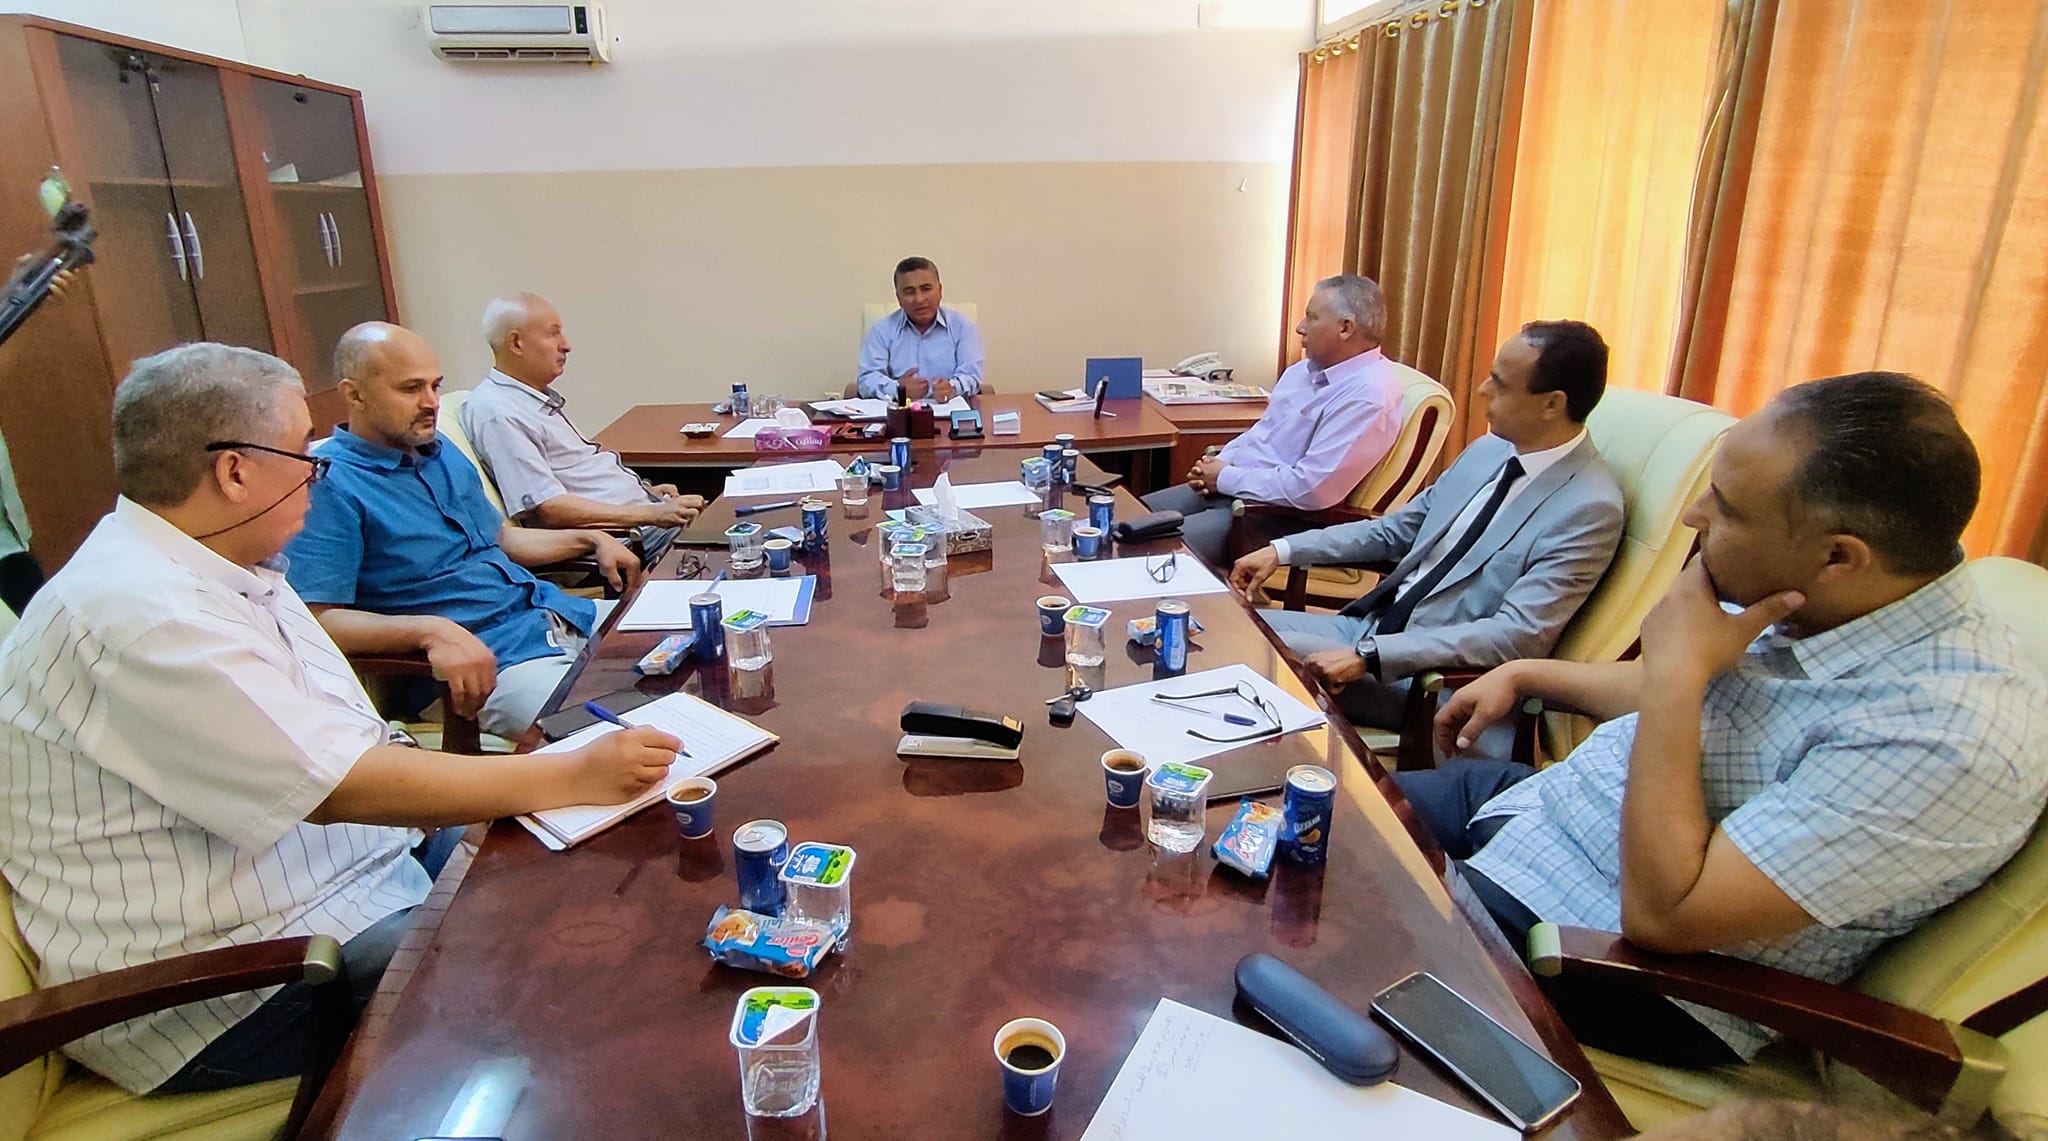 A joint meeting between Sabratha University and the Libyan Academy for Postgraduate Studies - Sahel Branch A
